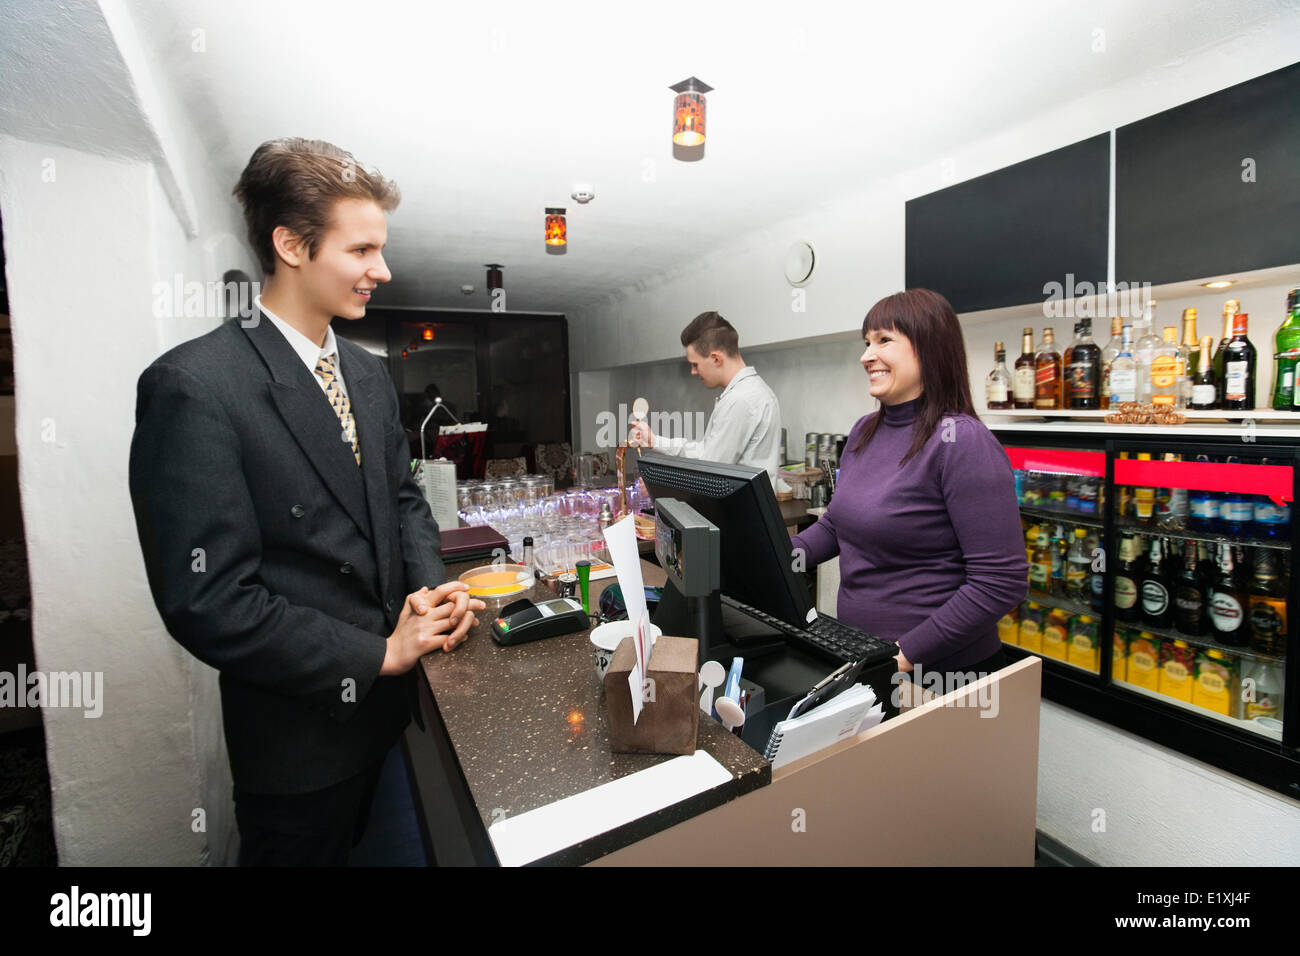 Manager communicating with cashier at bar counter Stock Photo